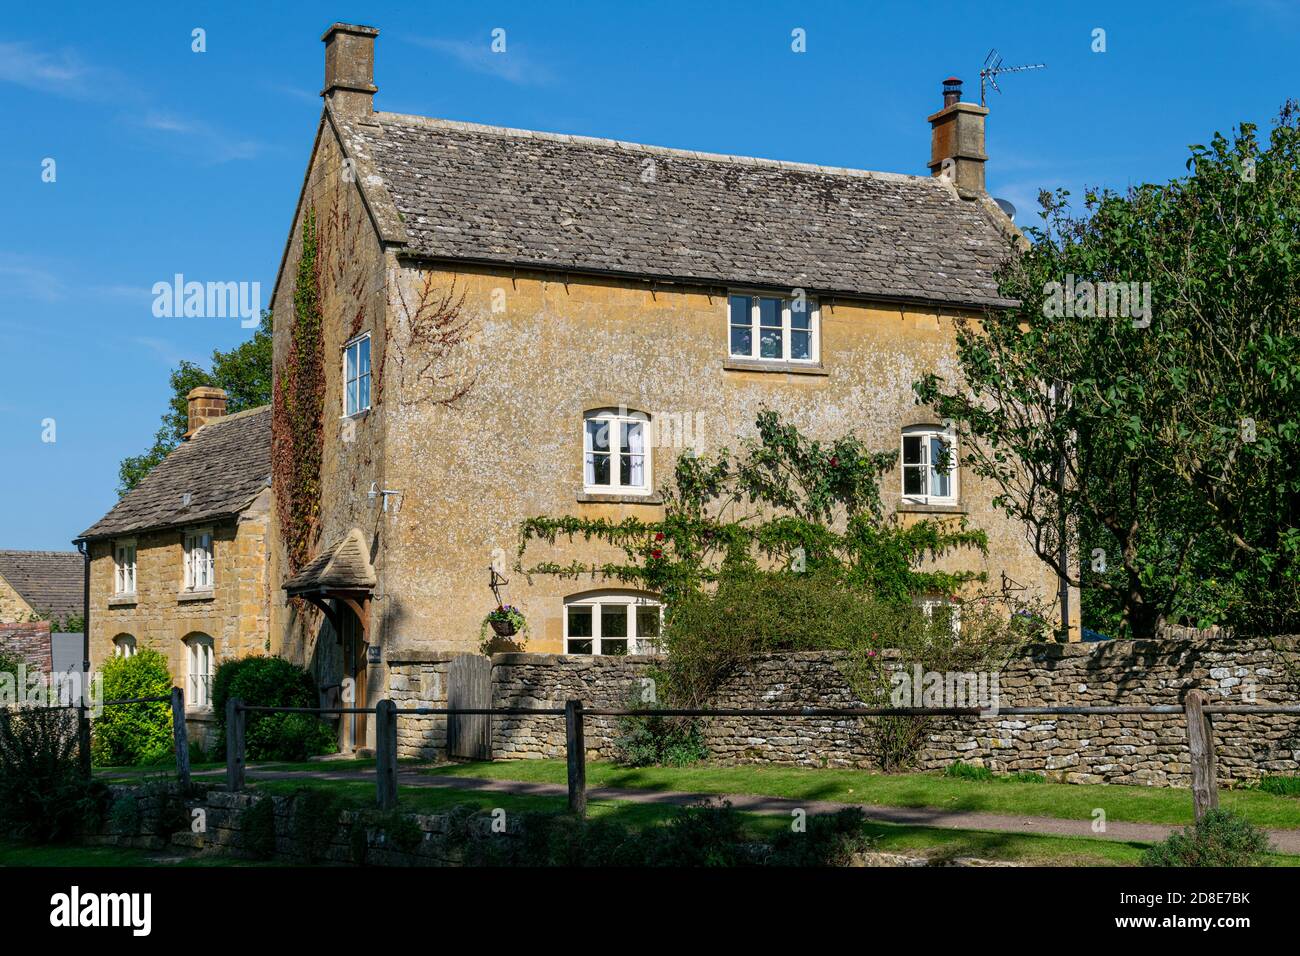 The Old School House, Guitting Power, Gloucestershire Banque D'Images